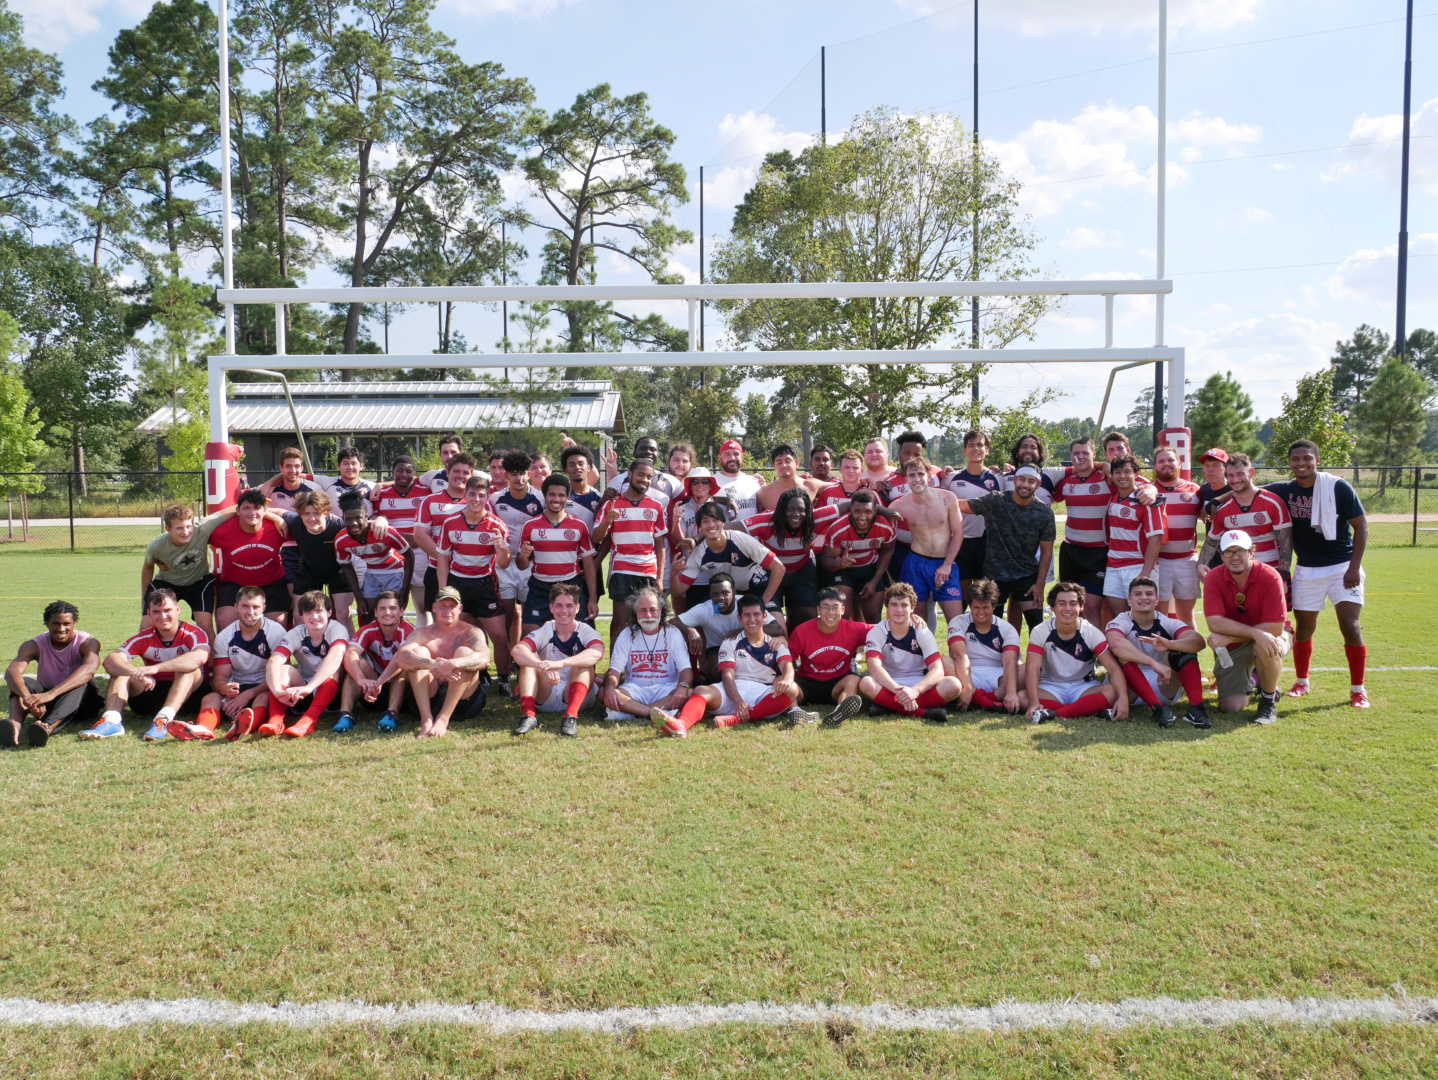 The UH and Louisiana Lafayette rugby teams come together after a scrimmage. | Courtesy of Christian Glover